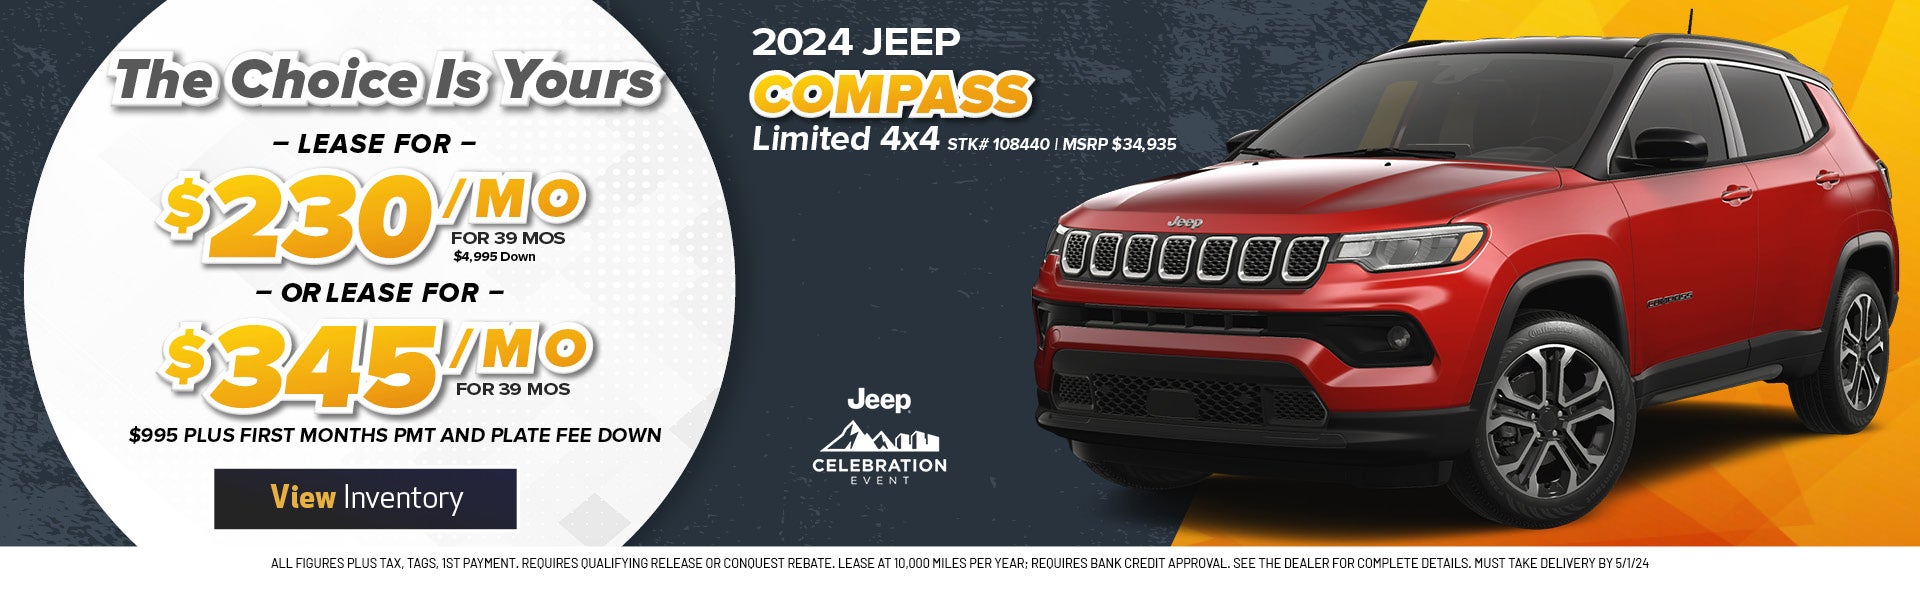  2024 JEEP COMPASS LIMITED 4x4